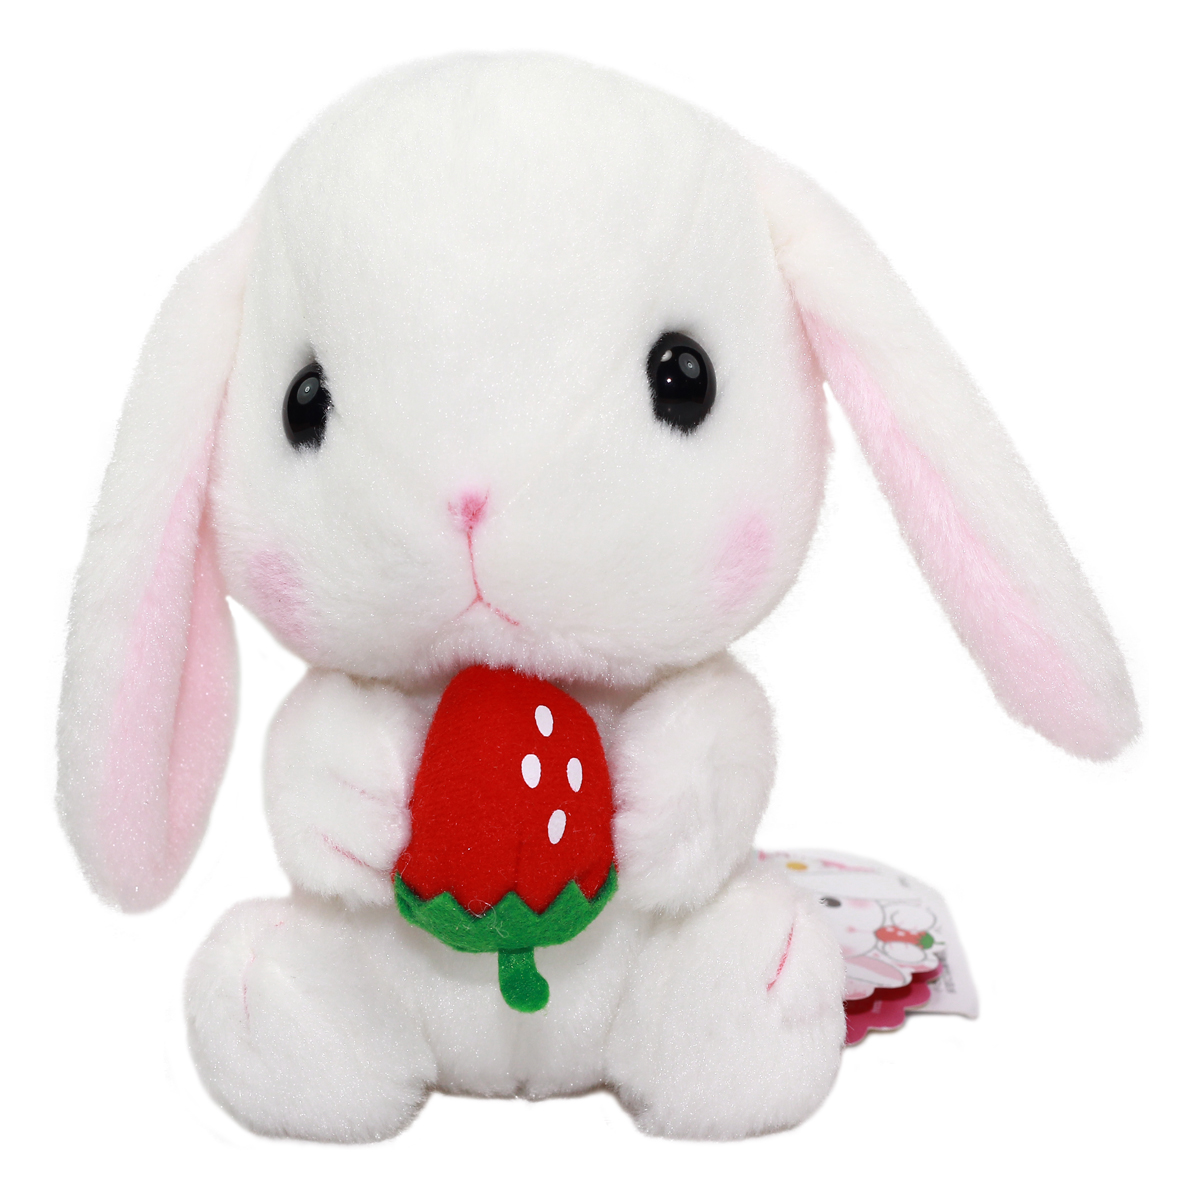 Amuse Bunny Plush Doll Sweet Garden Collection Cute Stuffed Animal Toy White 6 Inches